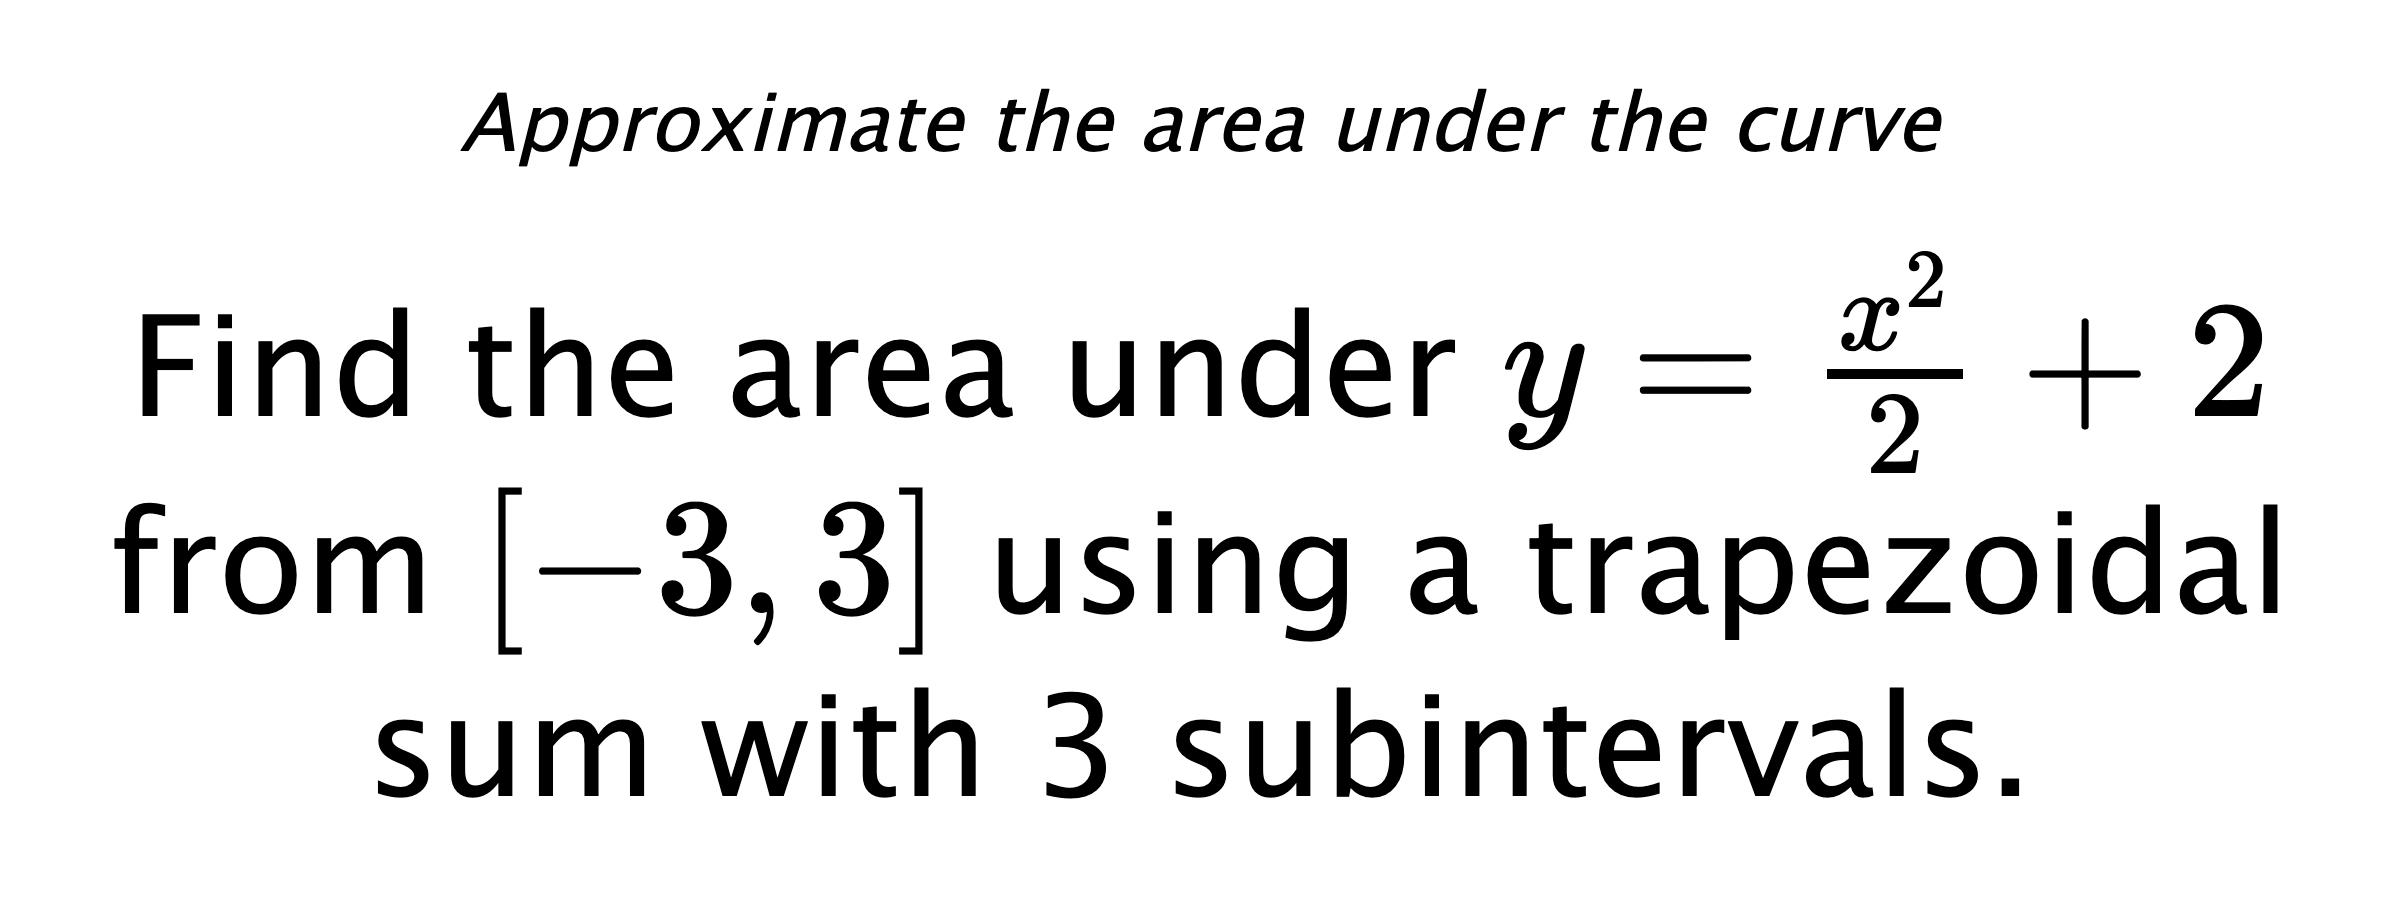 Approximate the area under the curve Find the area under $ y=\frac{x^2}{2}+2 $ from $ [-3,3] $ using a trapezoidal sum with 3 subintervals.